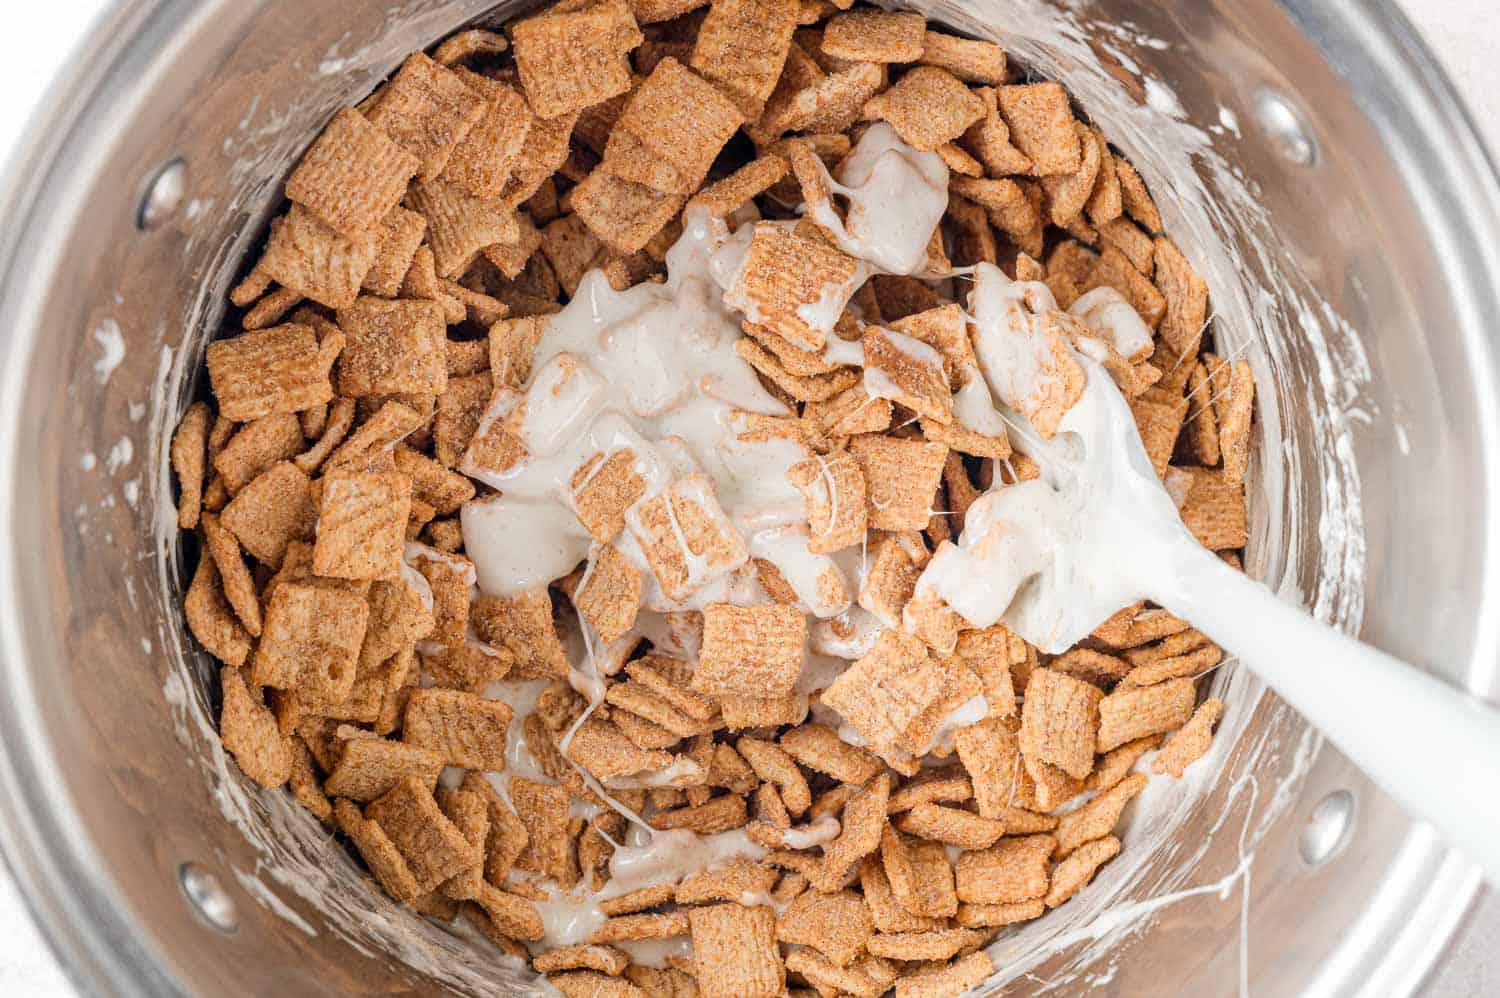 Marshmallows added to cereal.